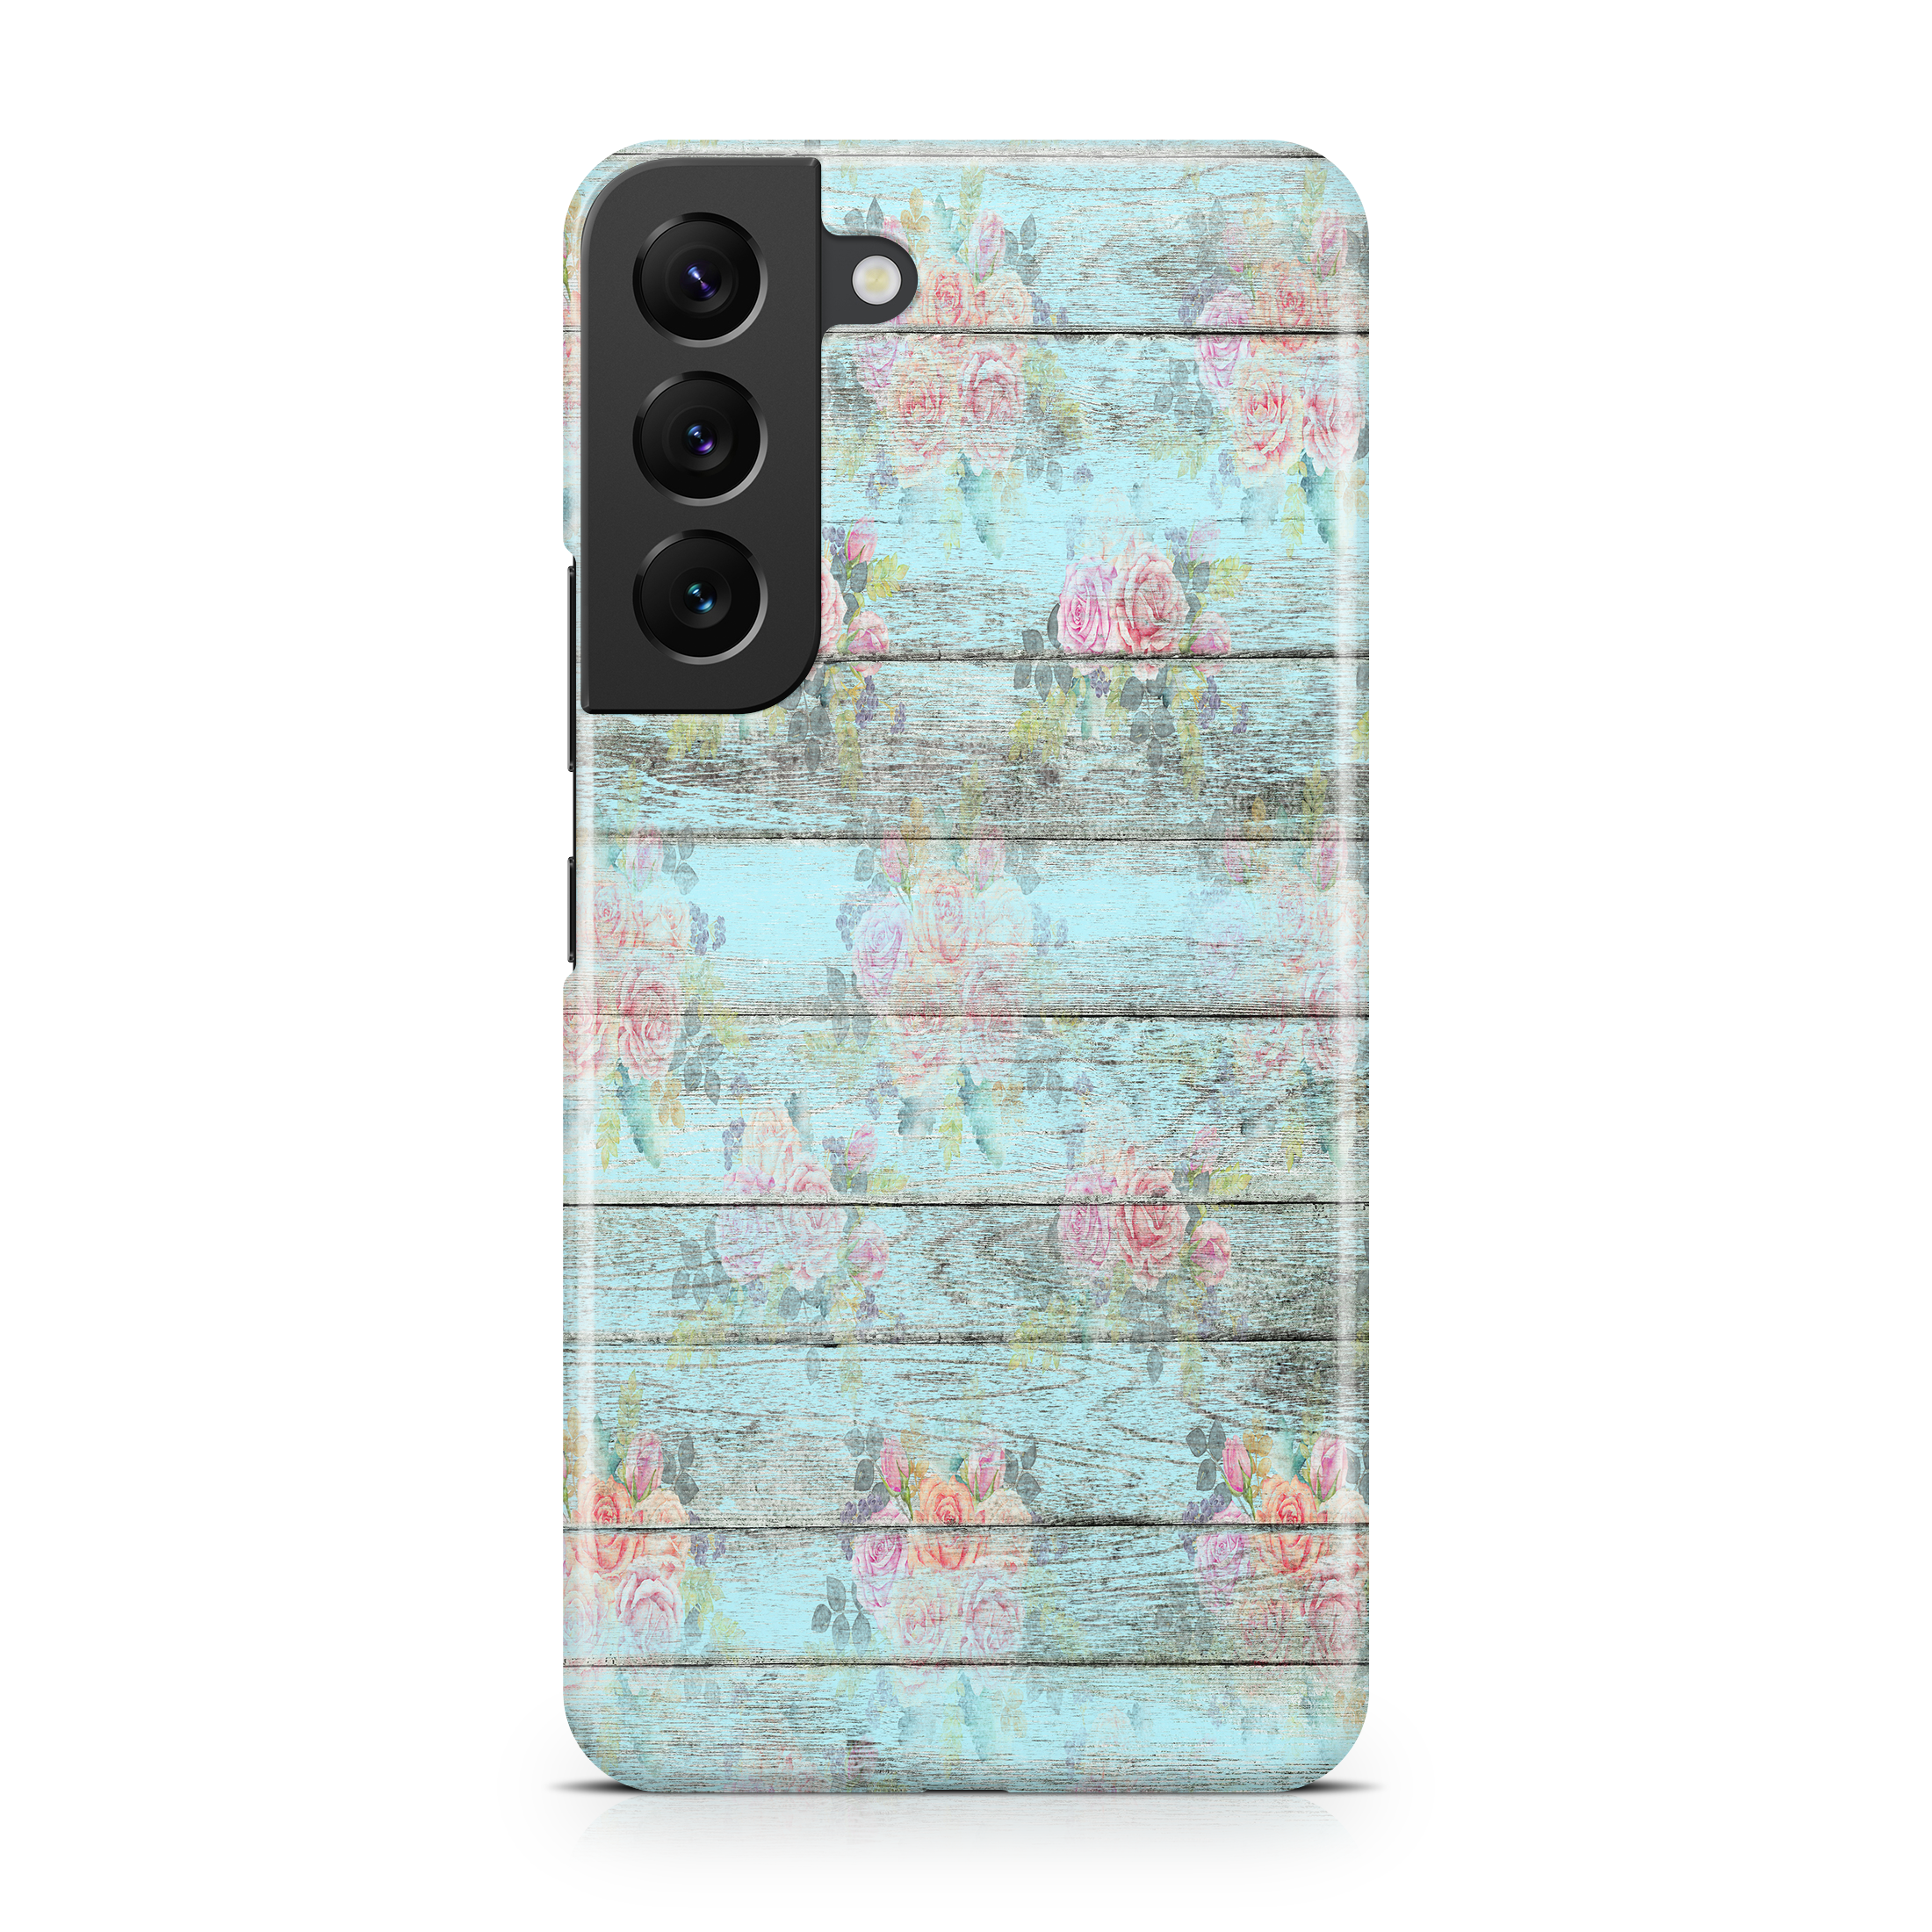 Shabby Chic Wood - Samsung phone case designs by CaseSwagger